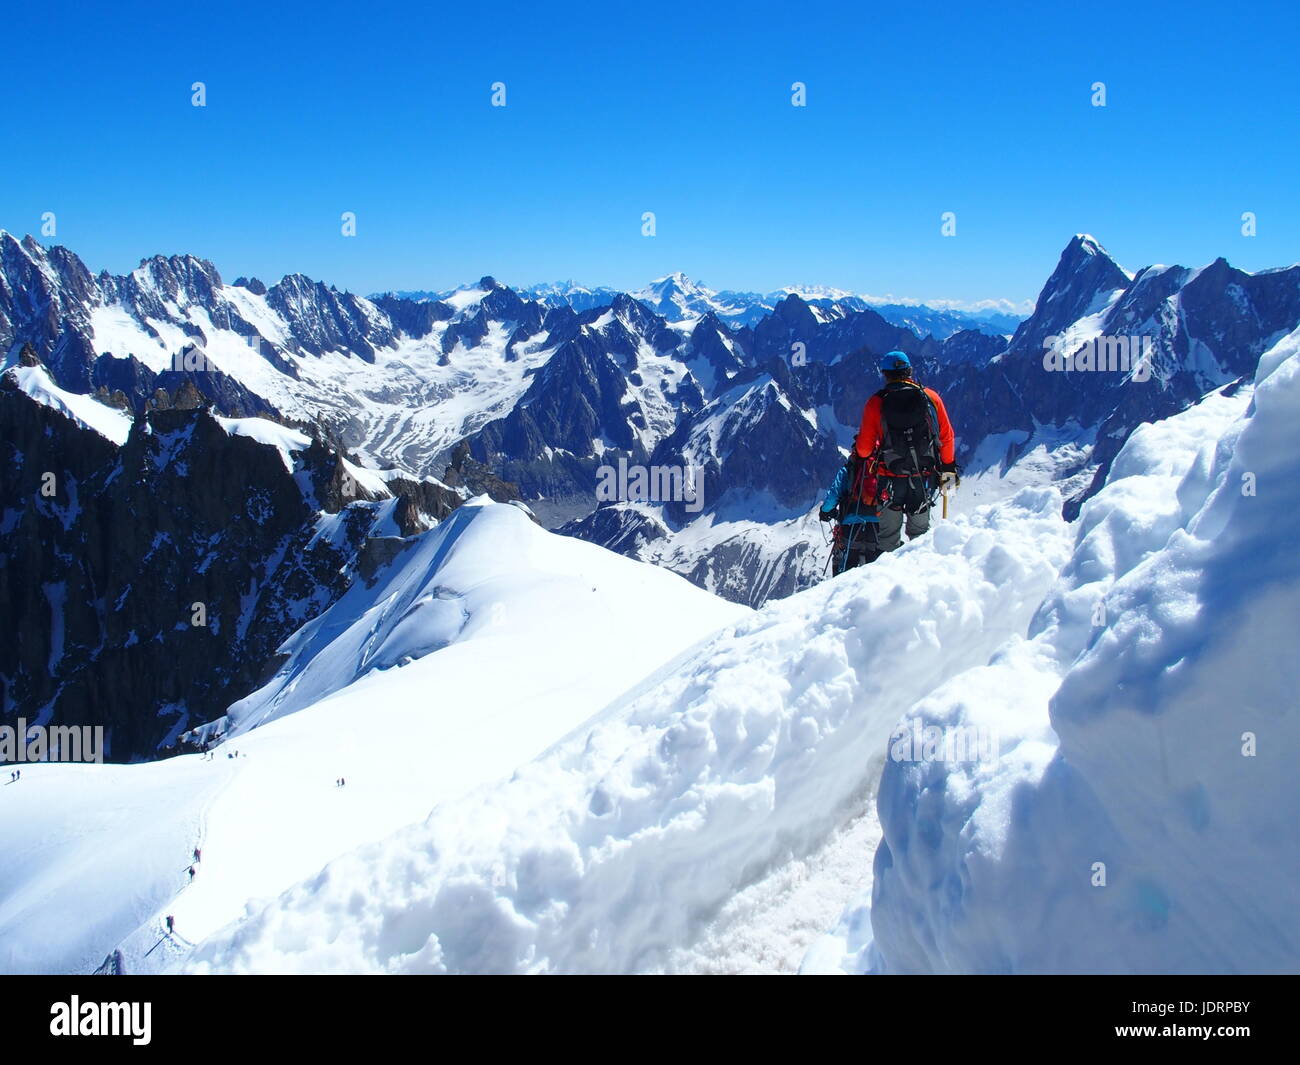 Two alpinists and mountaineer climber on AIGUILLE DU MIDI, CHAMONIX MONT BLANC french ALPS, top alpine mountains range landscape, FRANCE in 2016. Stock Photo